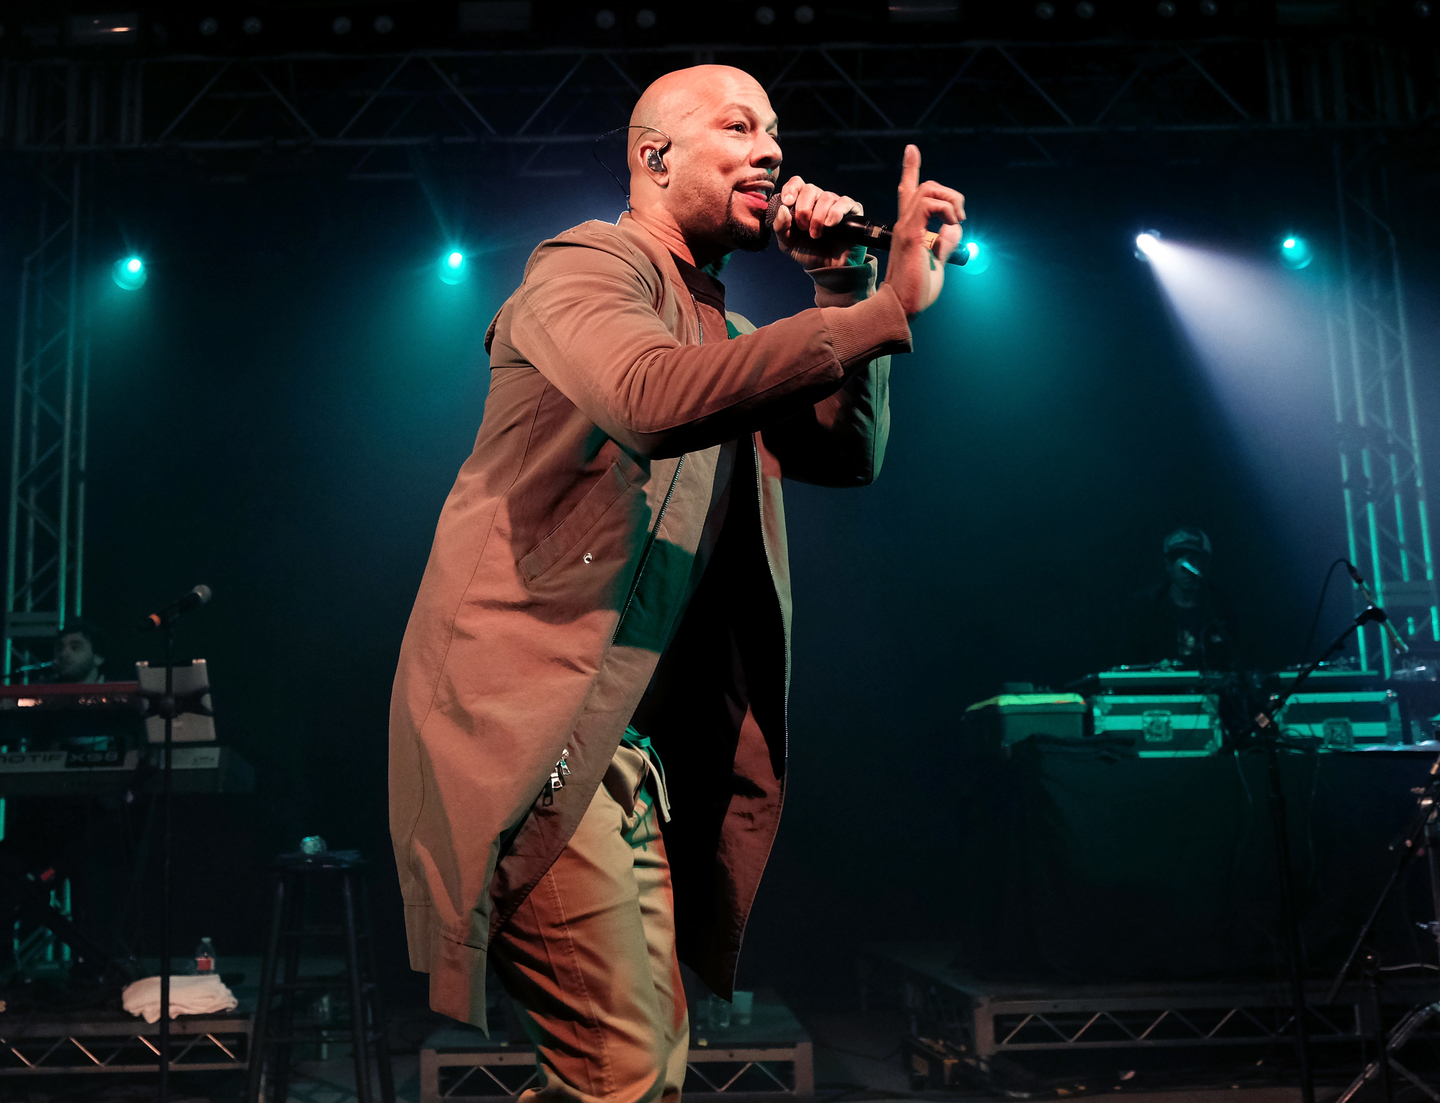 Common performed as part of August Greene at the NPR Music showcase at Stubb's. Photo by Hubert Vestil/Getty Images for SXSW